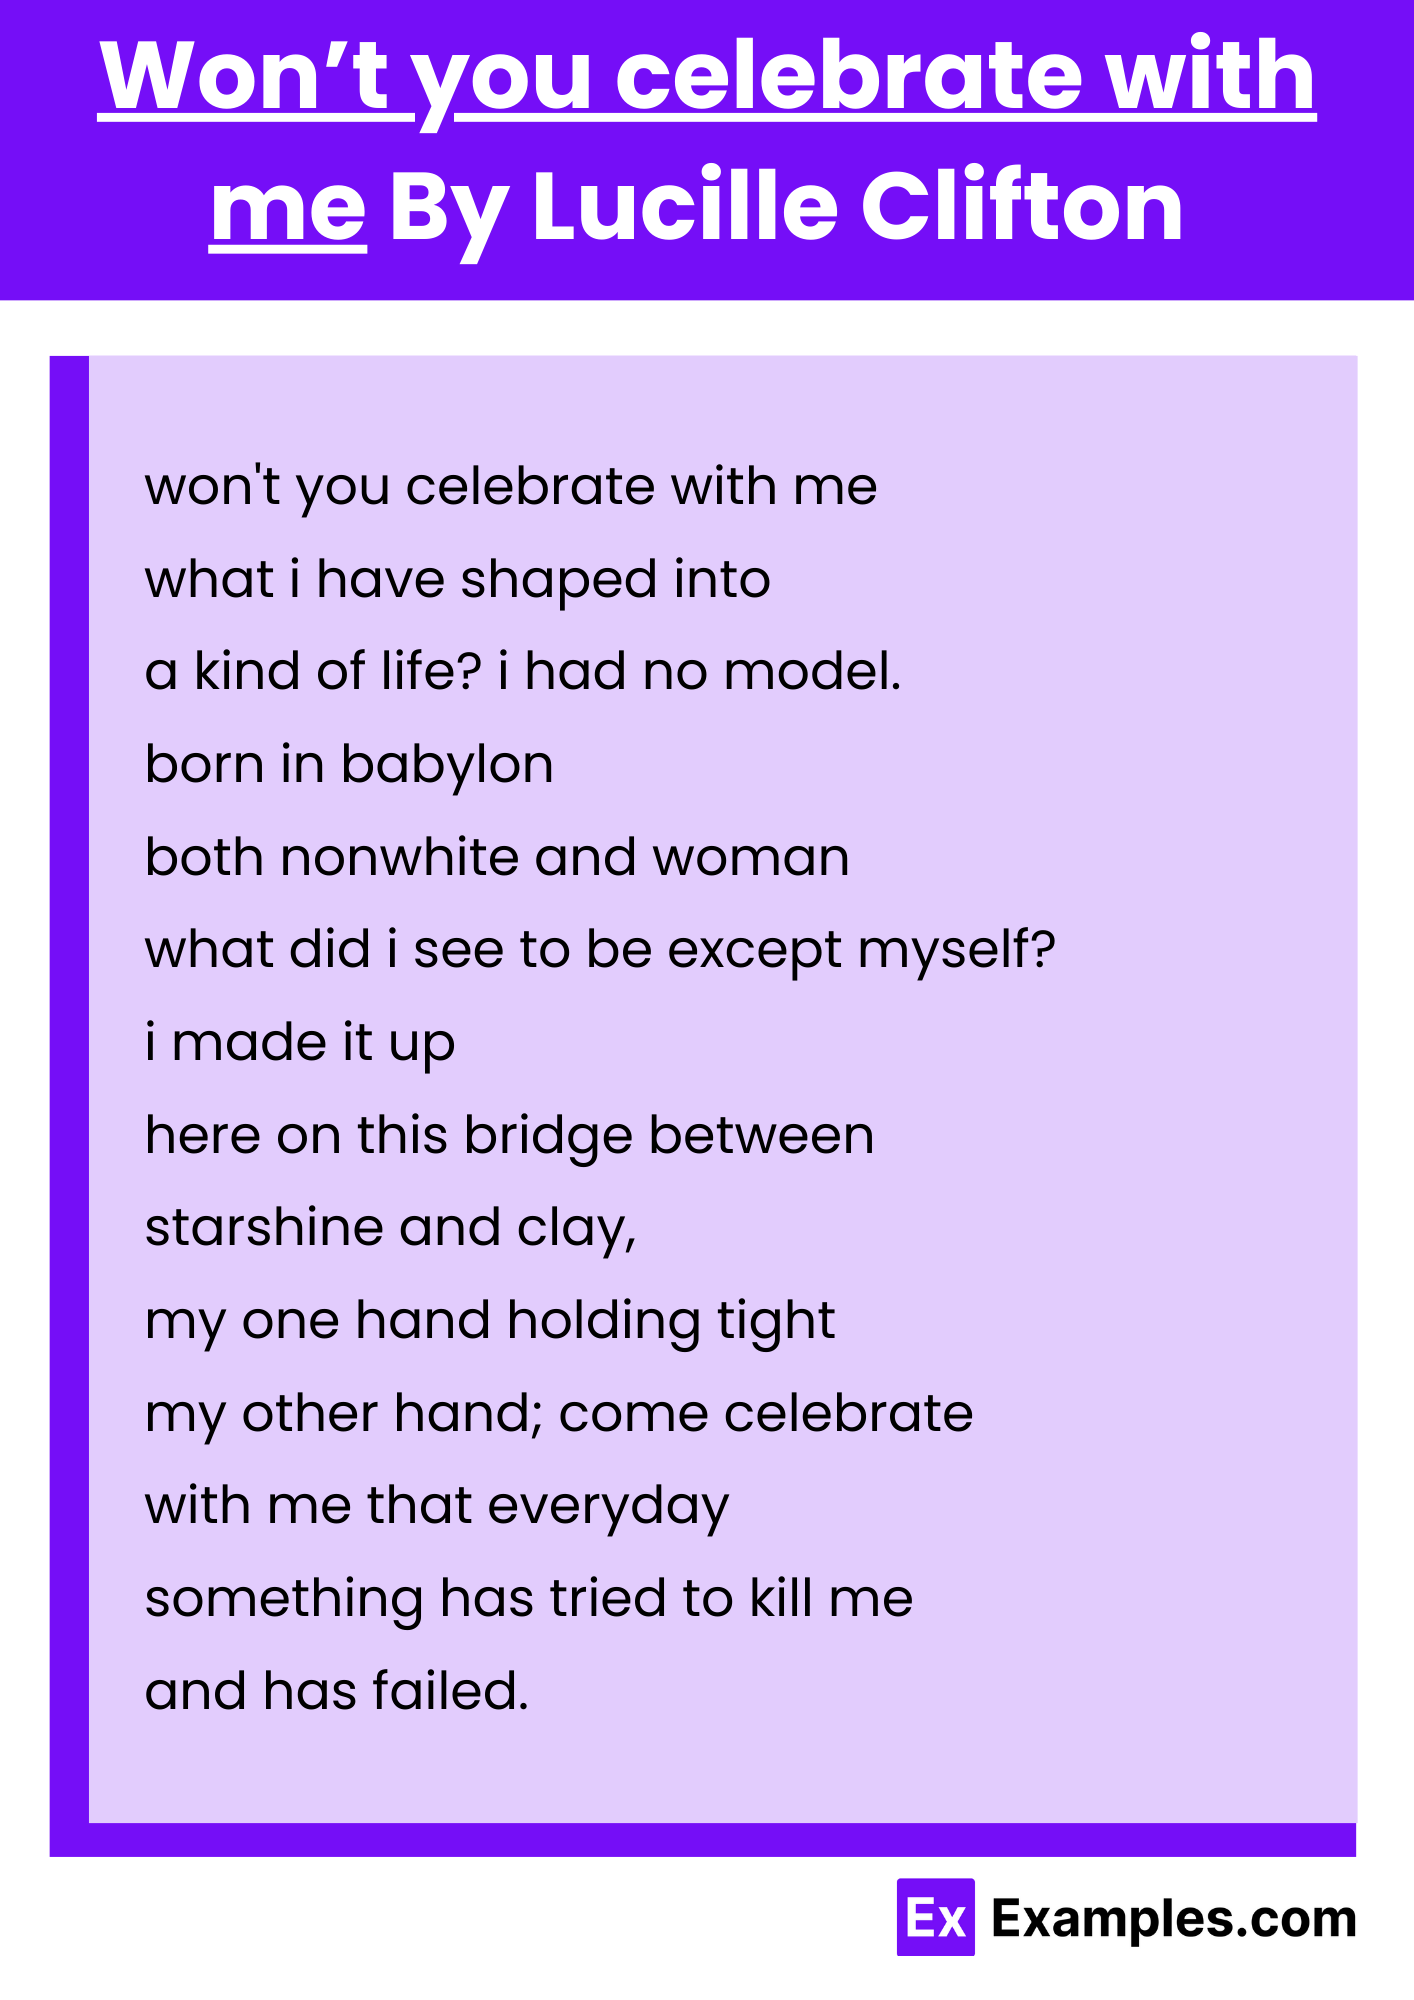 Won’t you celebrate with me By Lucille Clifton